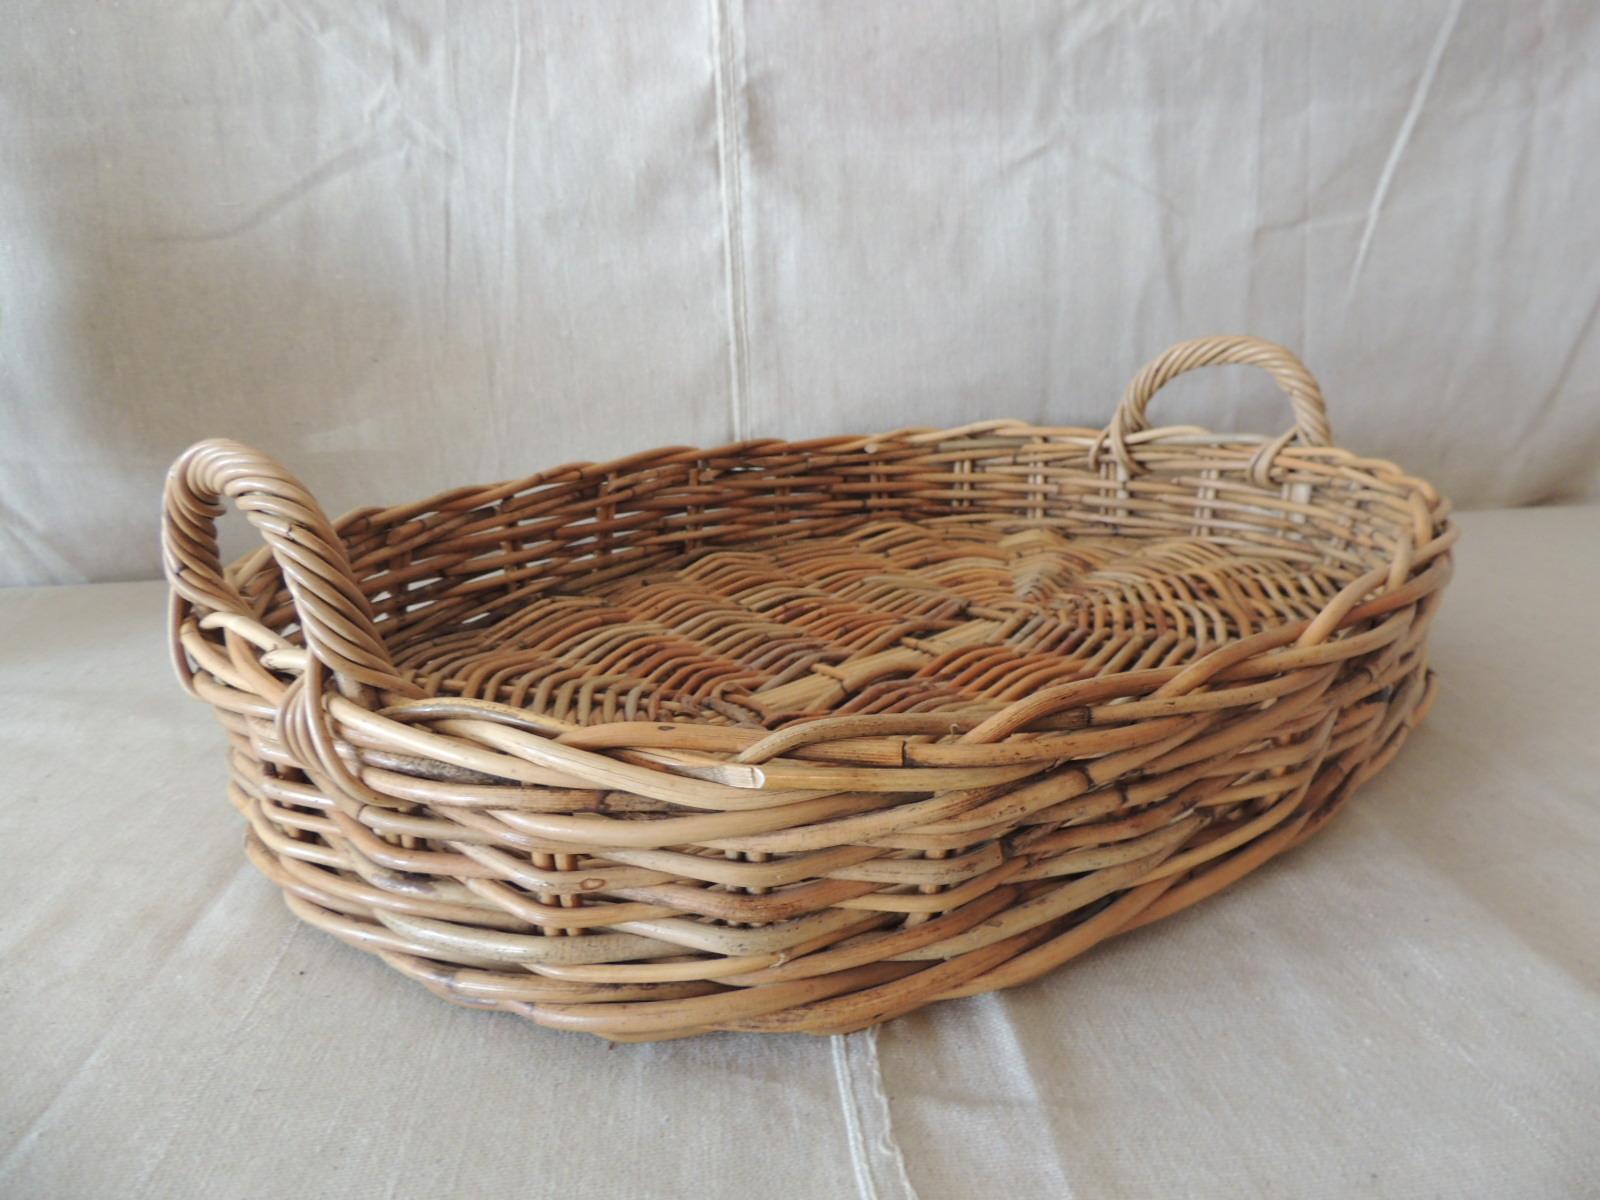 Vintage large oval farm table woven basket with handles.
Size: 20